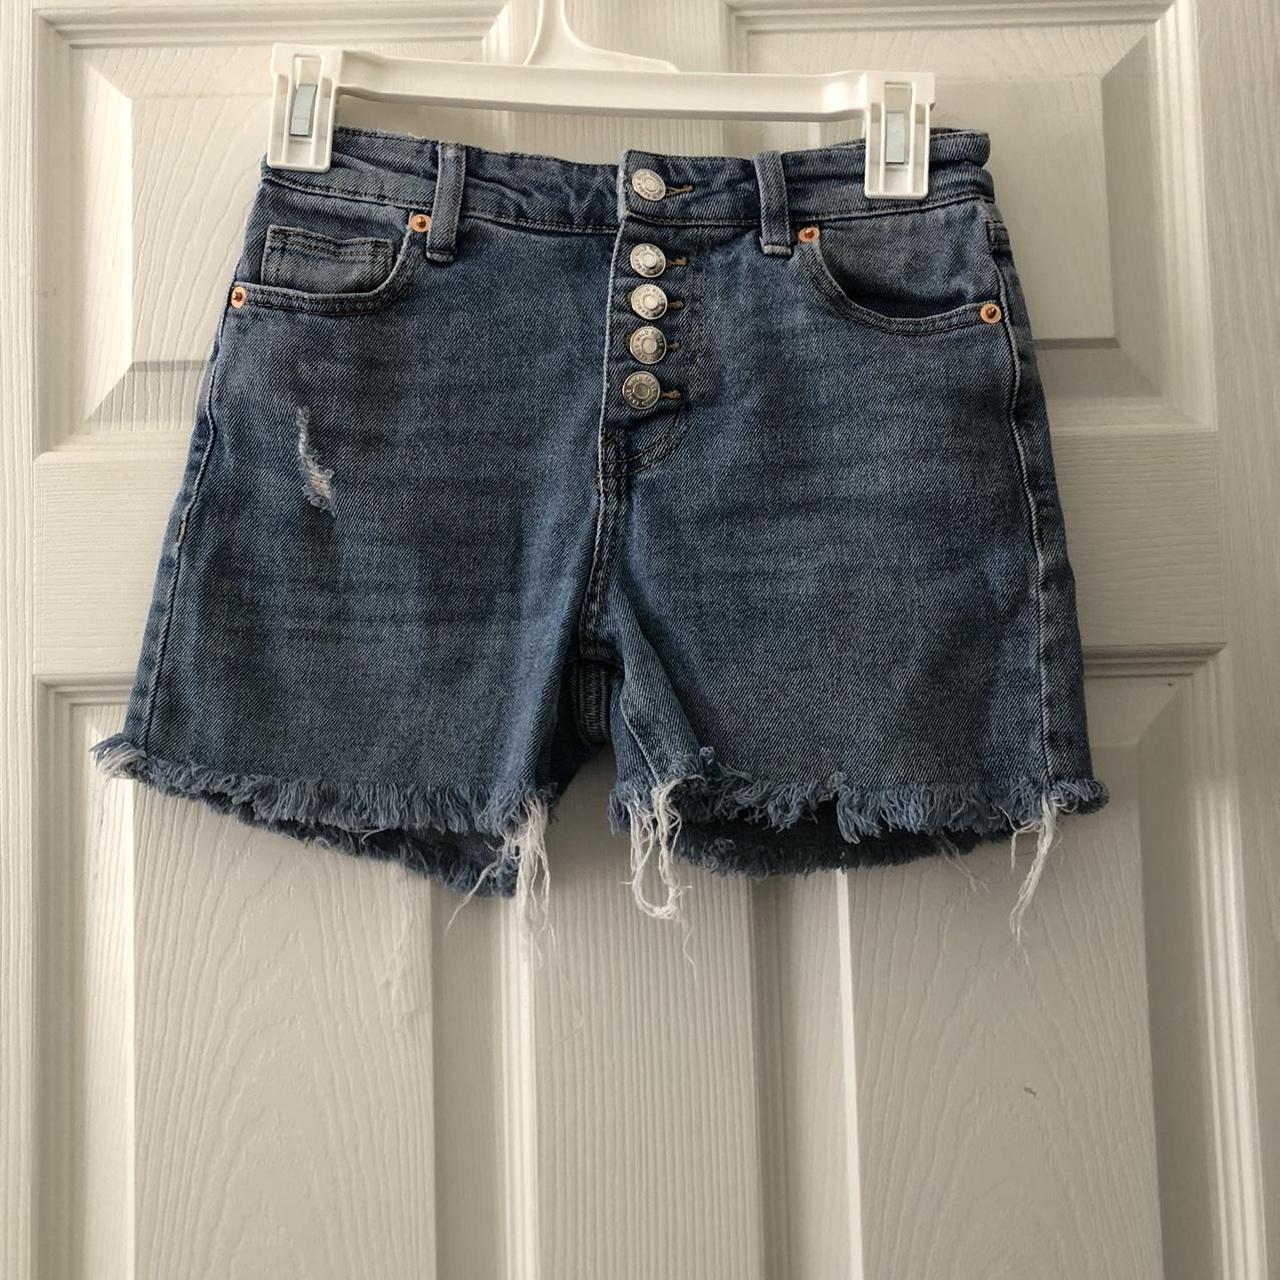 Wild fable jean shorts with multiple buttons. Size... - Depop